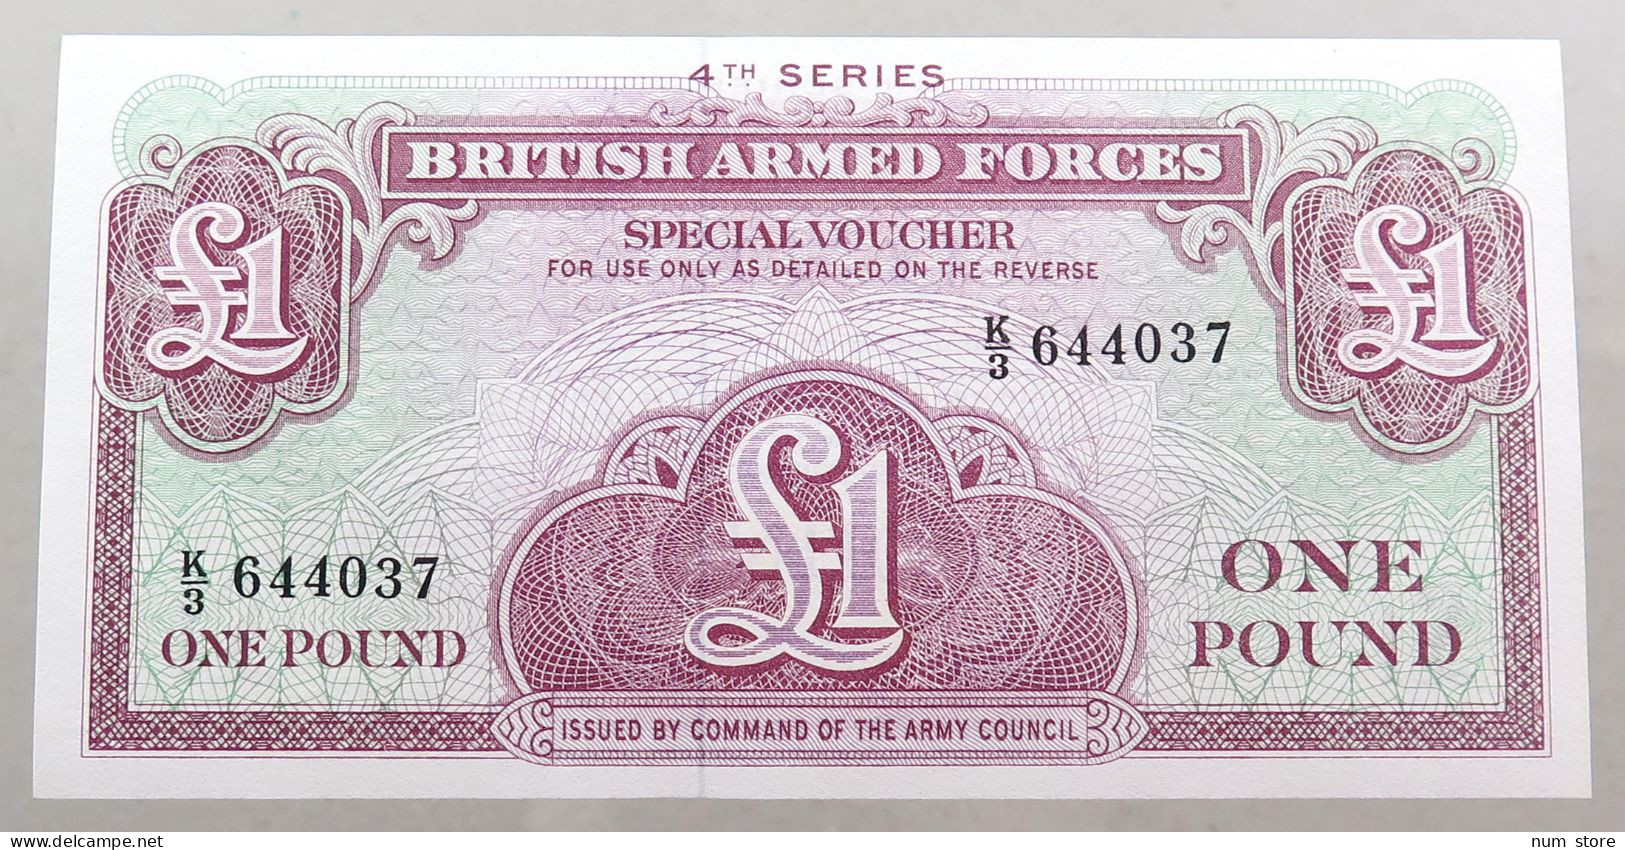 GREAT BRITAIN 1 POUND BRITISH ARMED FORCES TOP #alb049 0191 - British Armed Forces & Special Vouchers